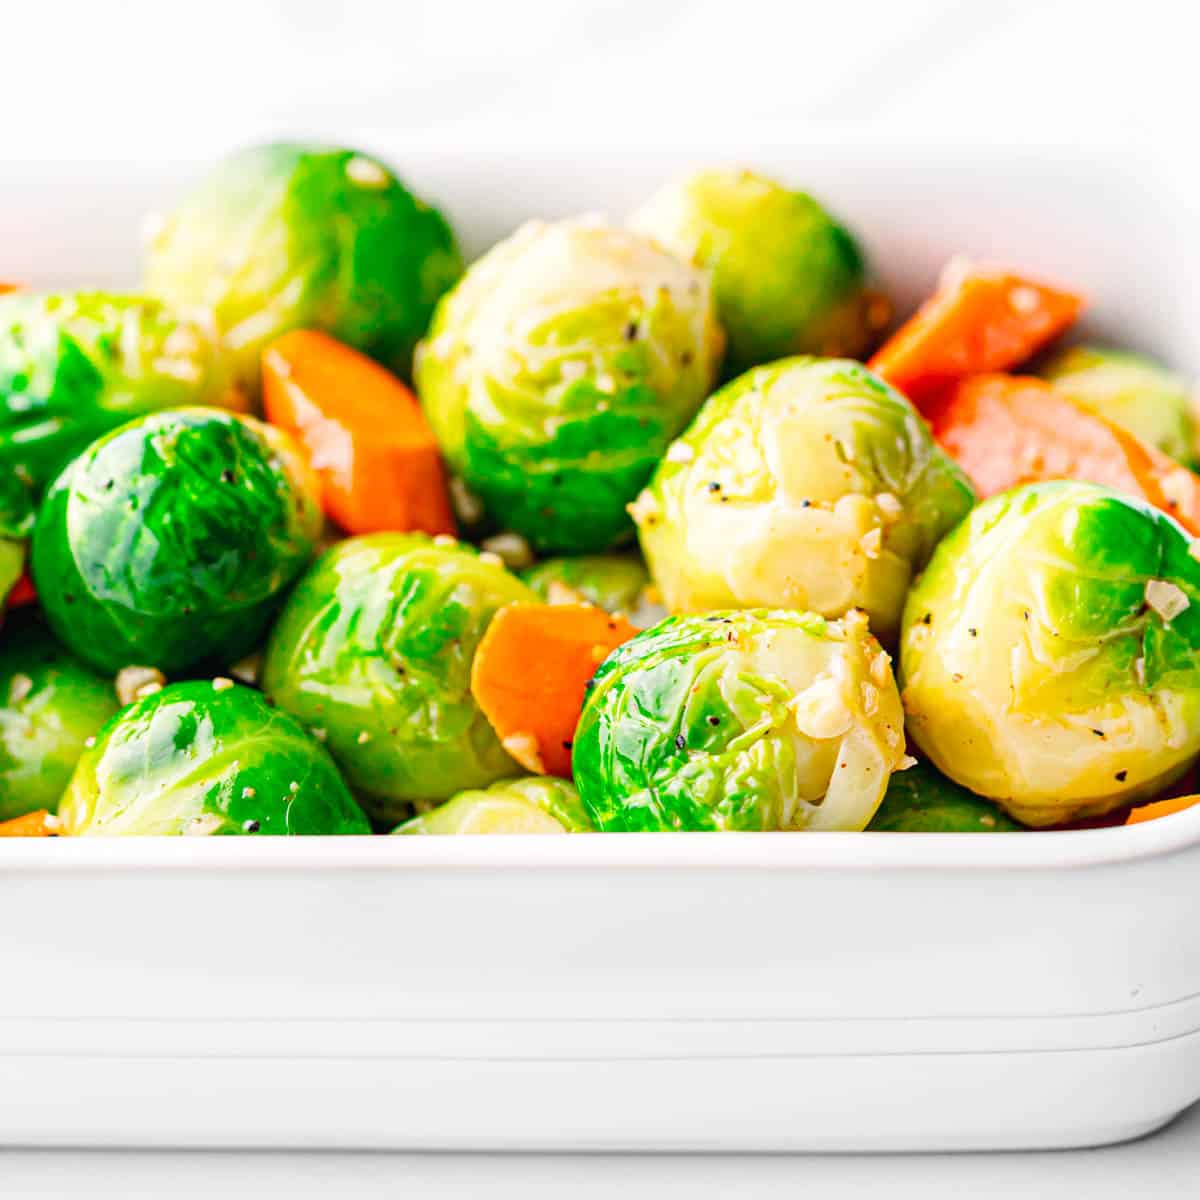 sautéed Brussels sprouts and carrots recipe.